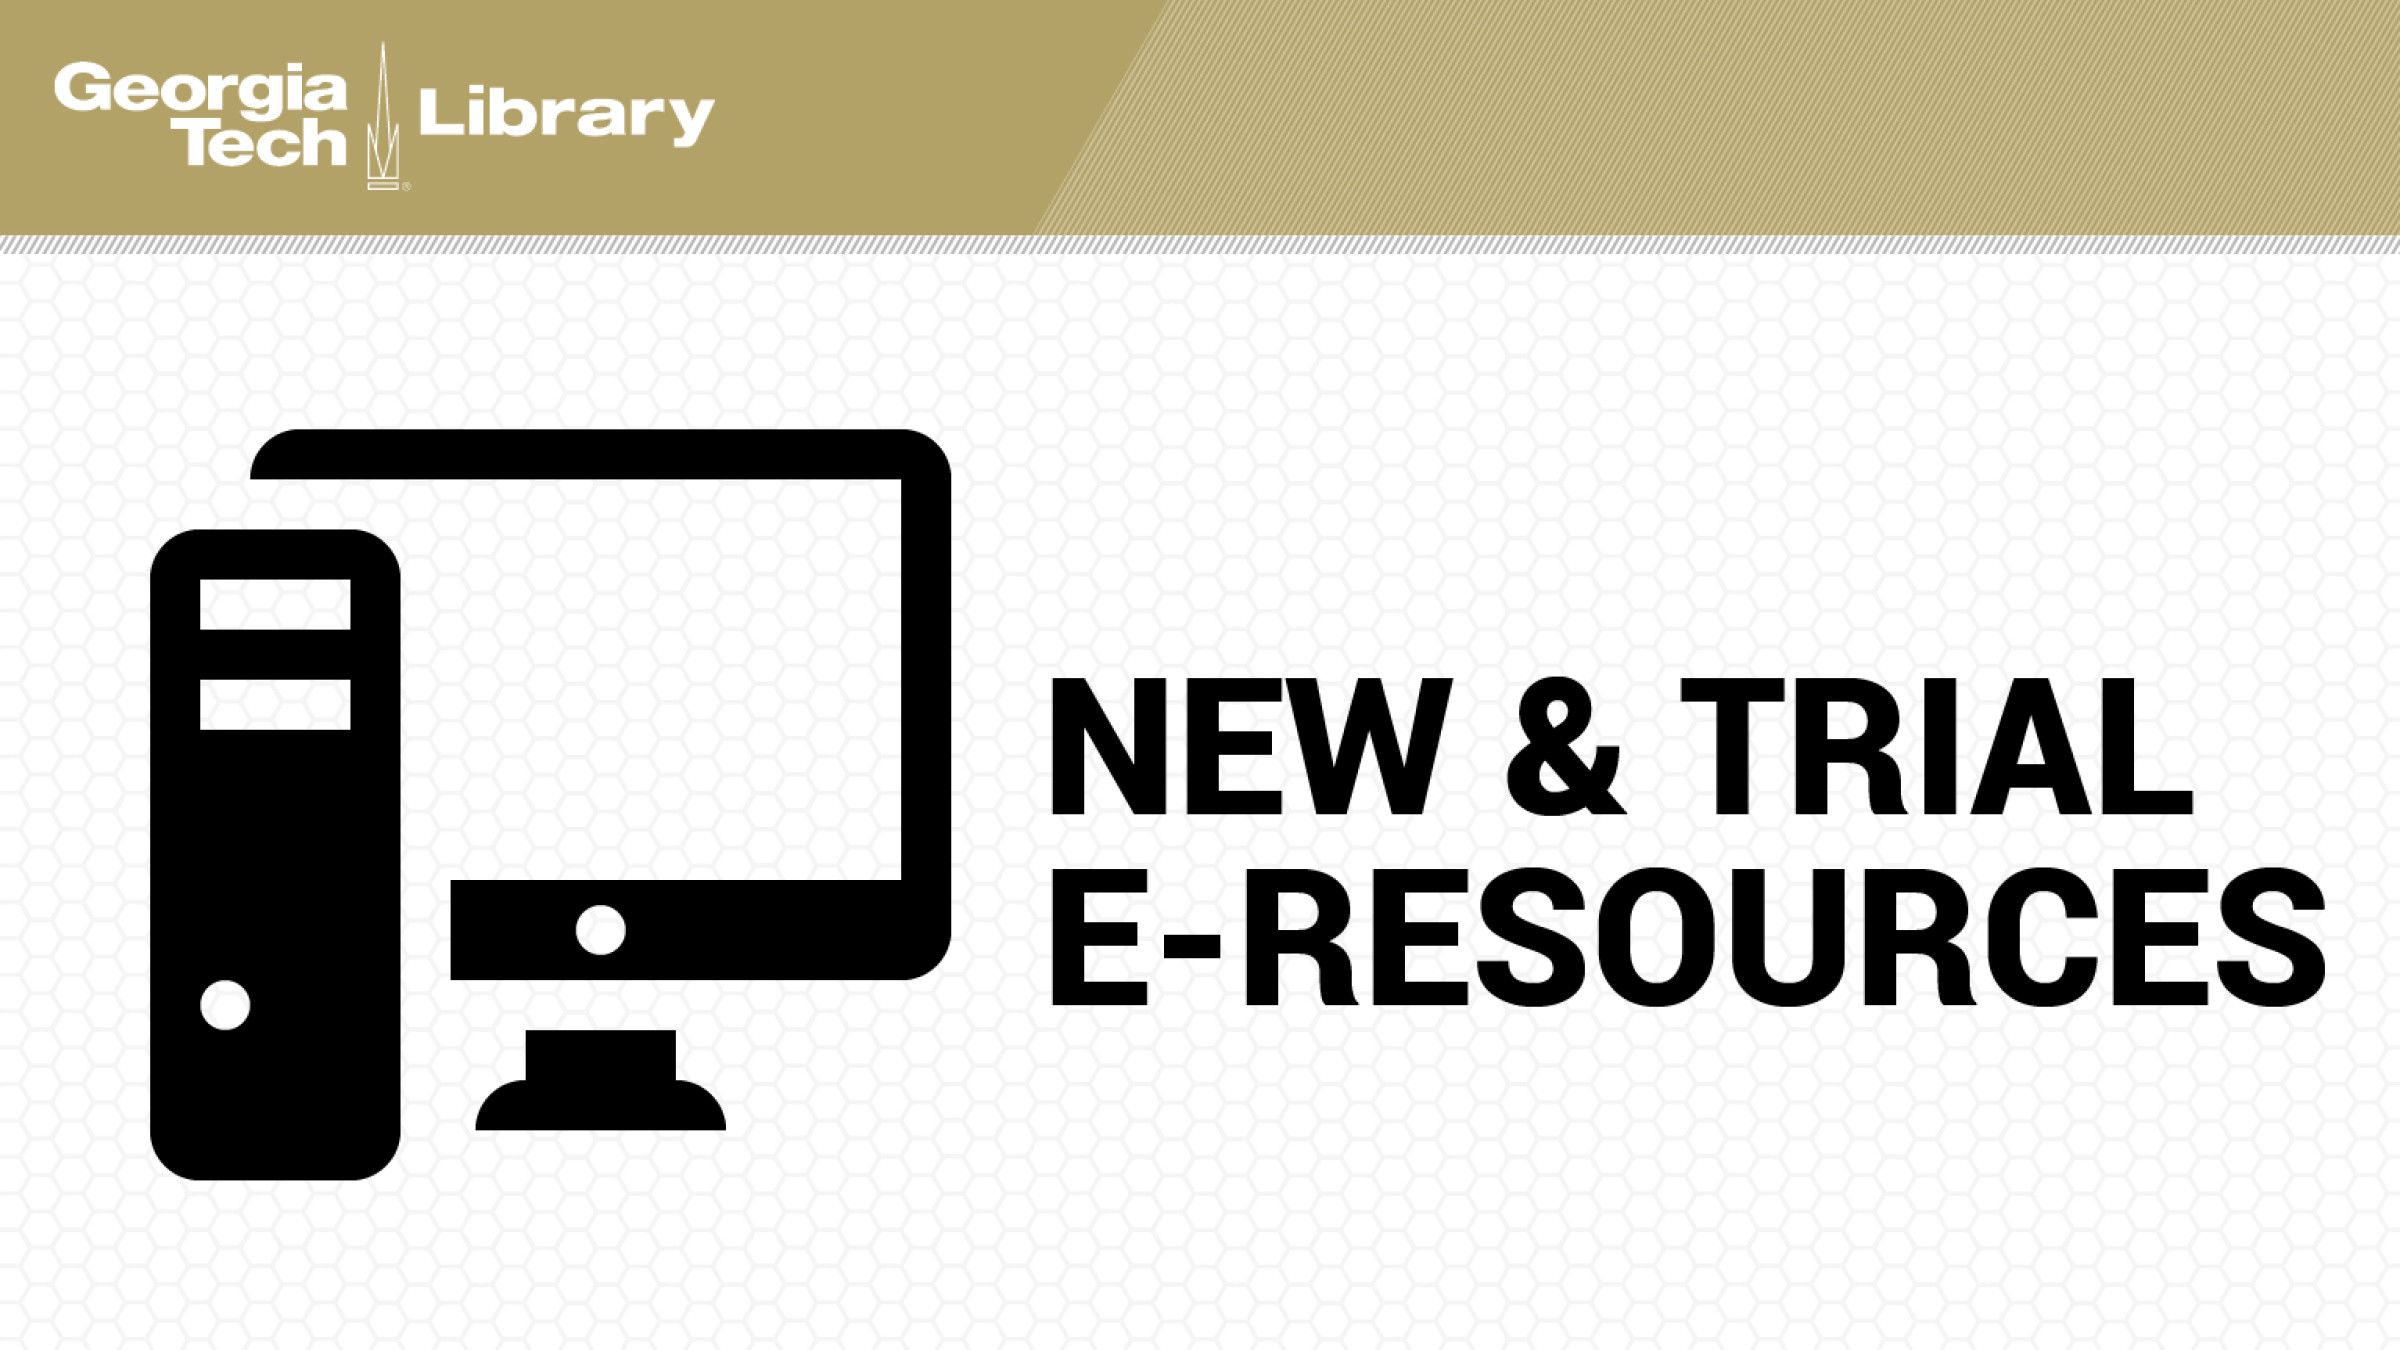 New & Trial eResources